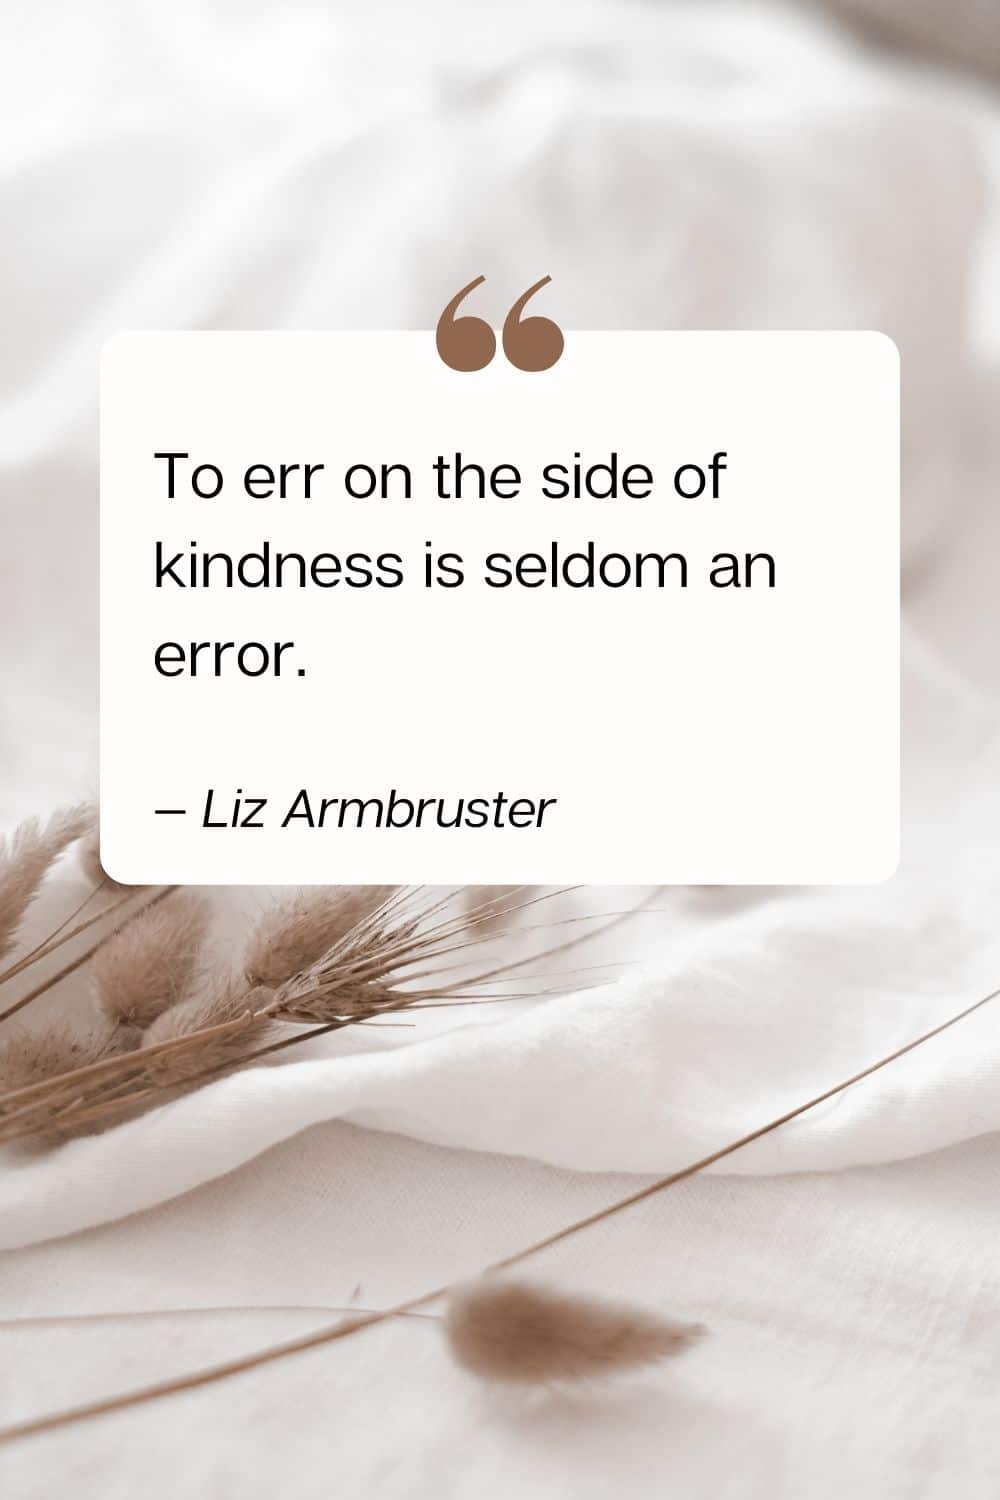 quote - To err on the side of kindness is seldom an error. — Liz Armbruster